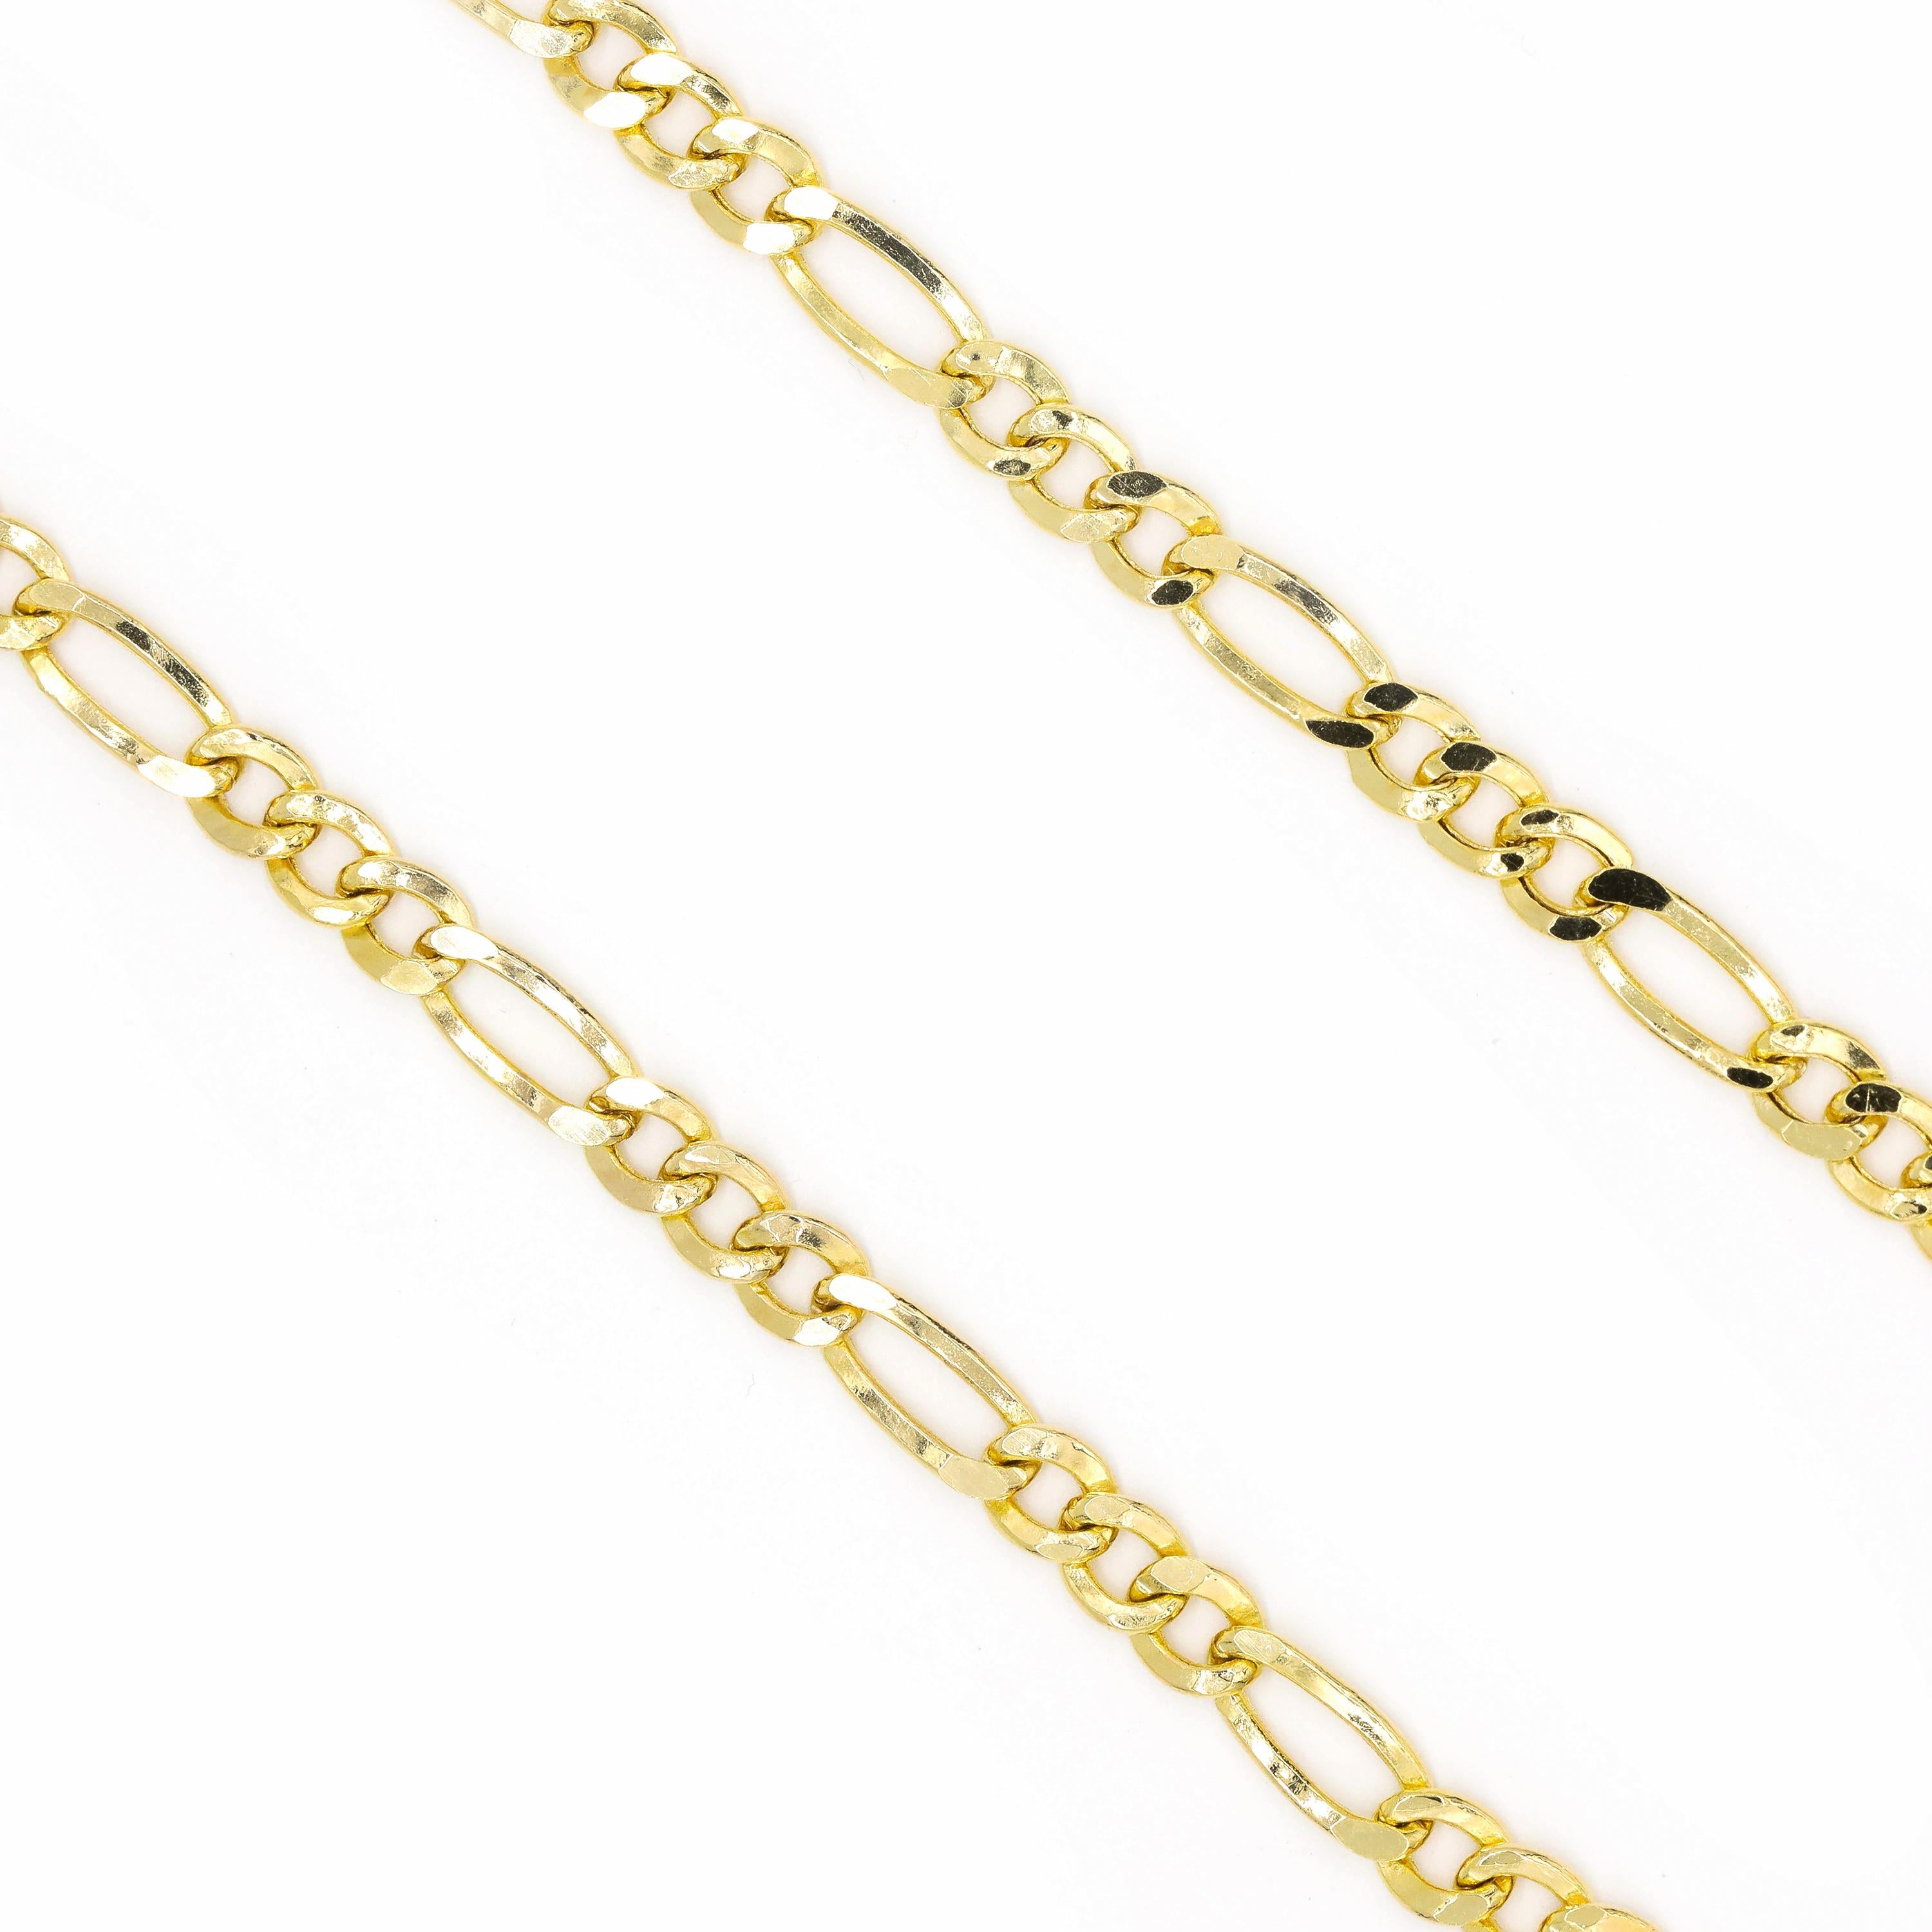 18 Karat Yellow Gold Link Chain Necklace Estate Jewelry

We guarantee all products sold and our number one priority is your complete 100% satisfaction.

Returns are accepted and Fast delivery.

Please FOLLOW the D’amati storefronts to be the first